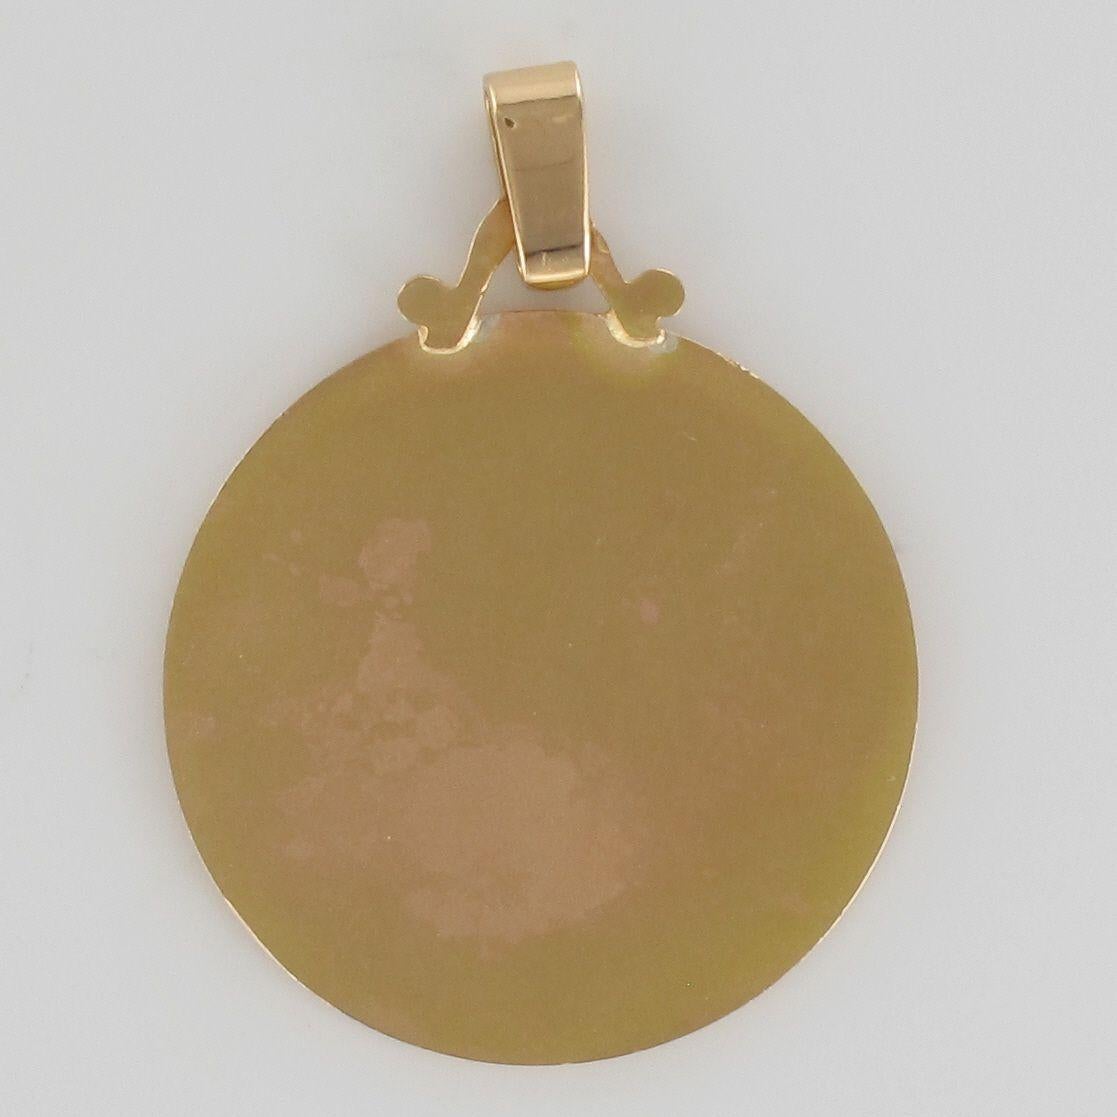 Medal in 18 karat yellow gold, eagle head hallmark.
Religious pendant representing the profile of the Virgin Mary on yellow gold matte bordered with rose gold.
Signed by the engraver Contaux.
Total length : 3,2 cm, width at the widest : 2,5 cm,